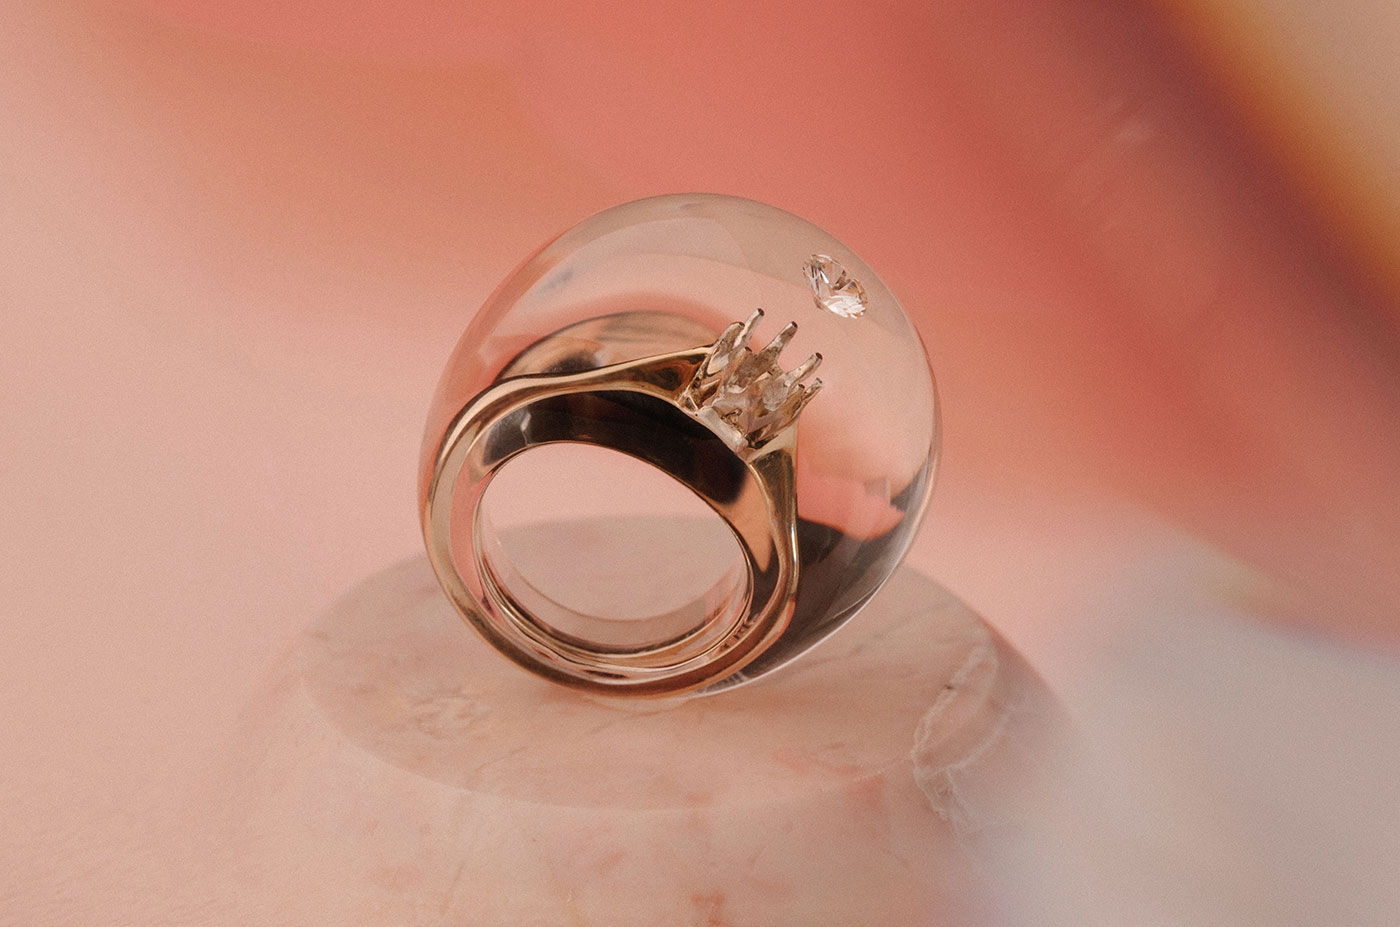 Ami Masamitsu used clear acrylic to suspend a reclaimed engagement ring and a polished diamond to explore issues of sustainability in jewellery